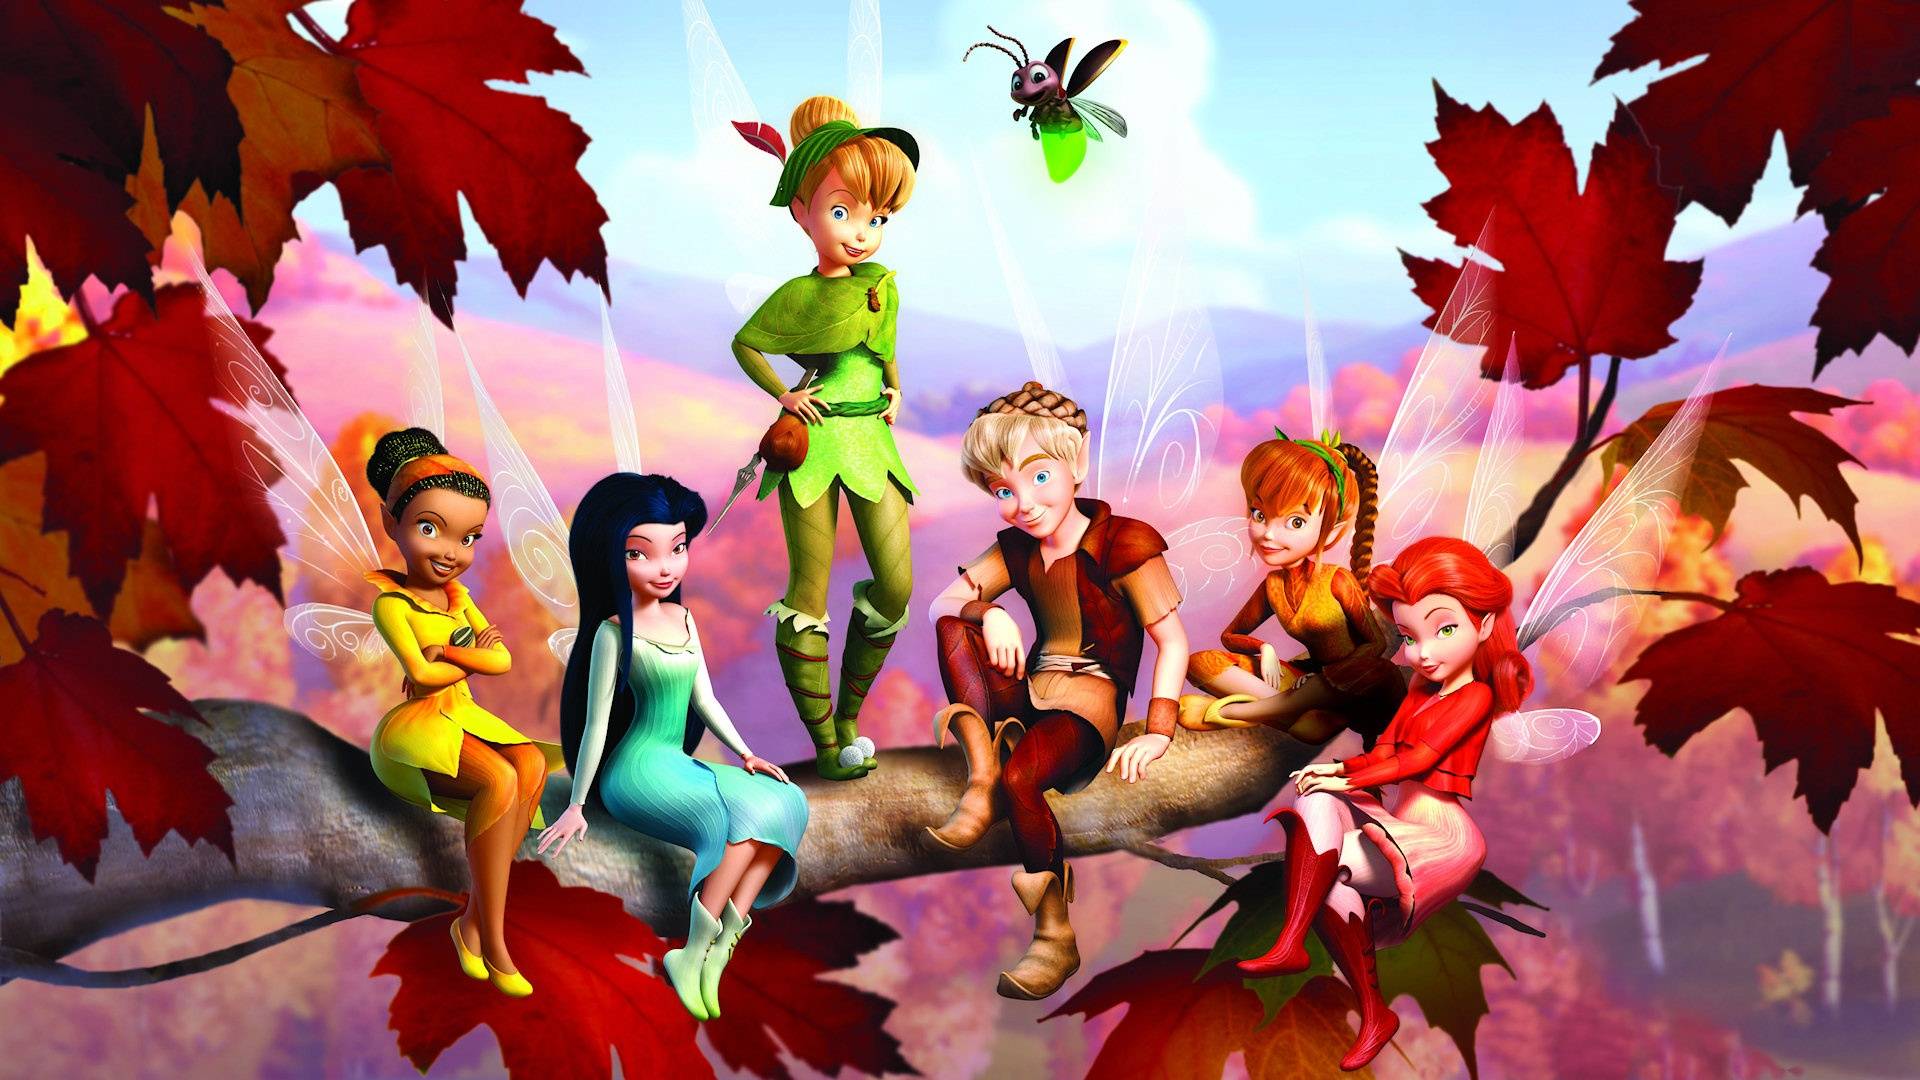 That S My Favourite Wallpaper Of Tinker Bell And Her Friends D But I